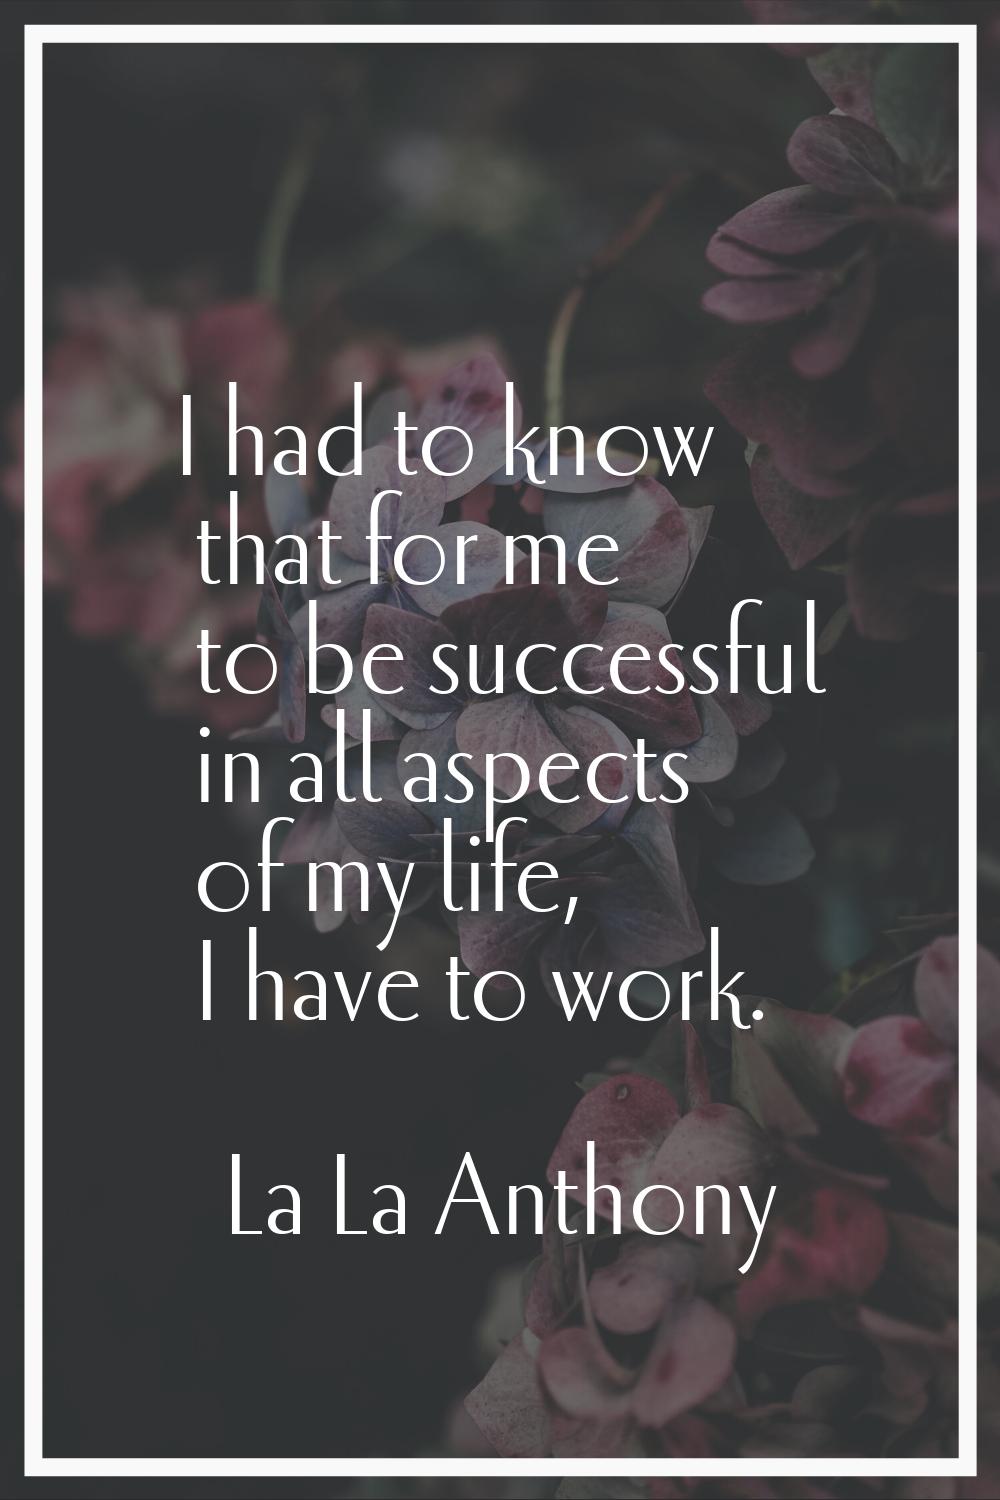 I had to know that for me to be successful in all aspects of my life, I have to work.